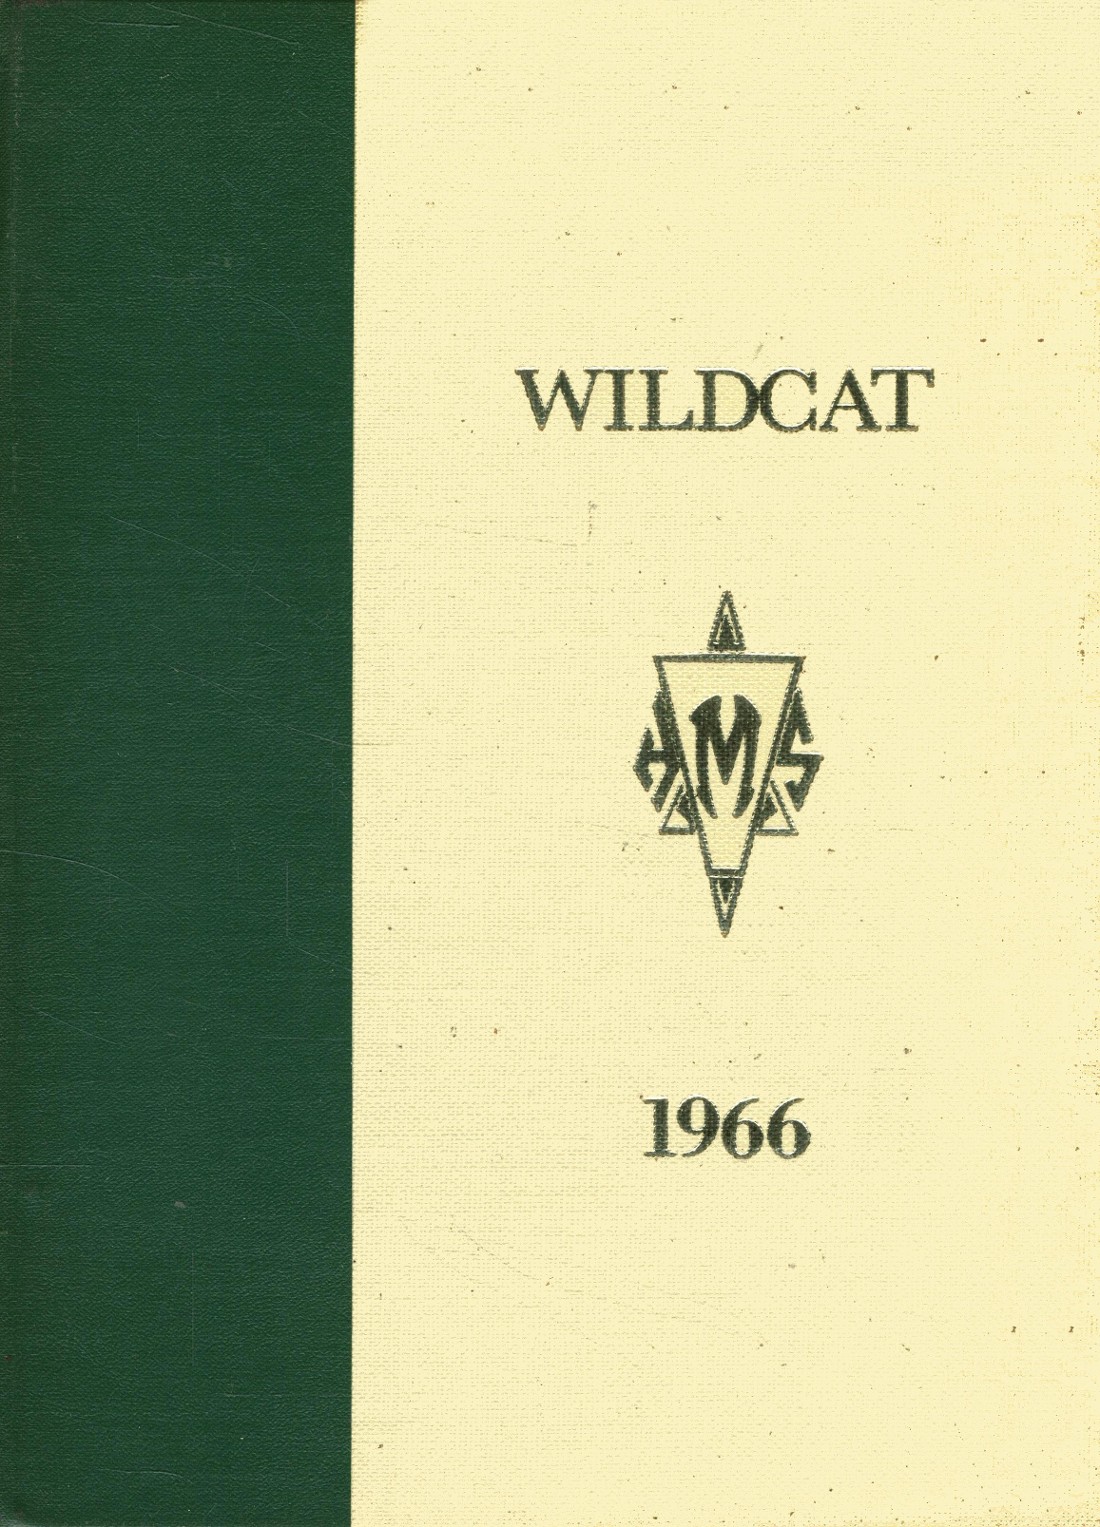 1966 yearbook from Mulvane High School from Mulvane, Kansas for sale